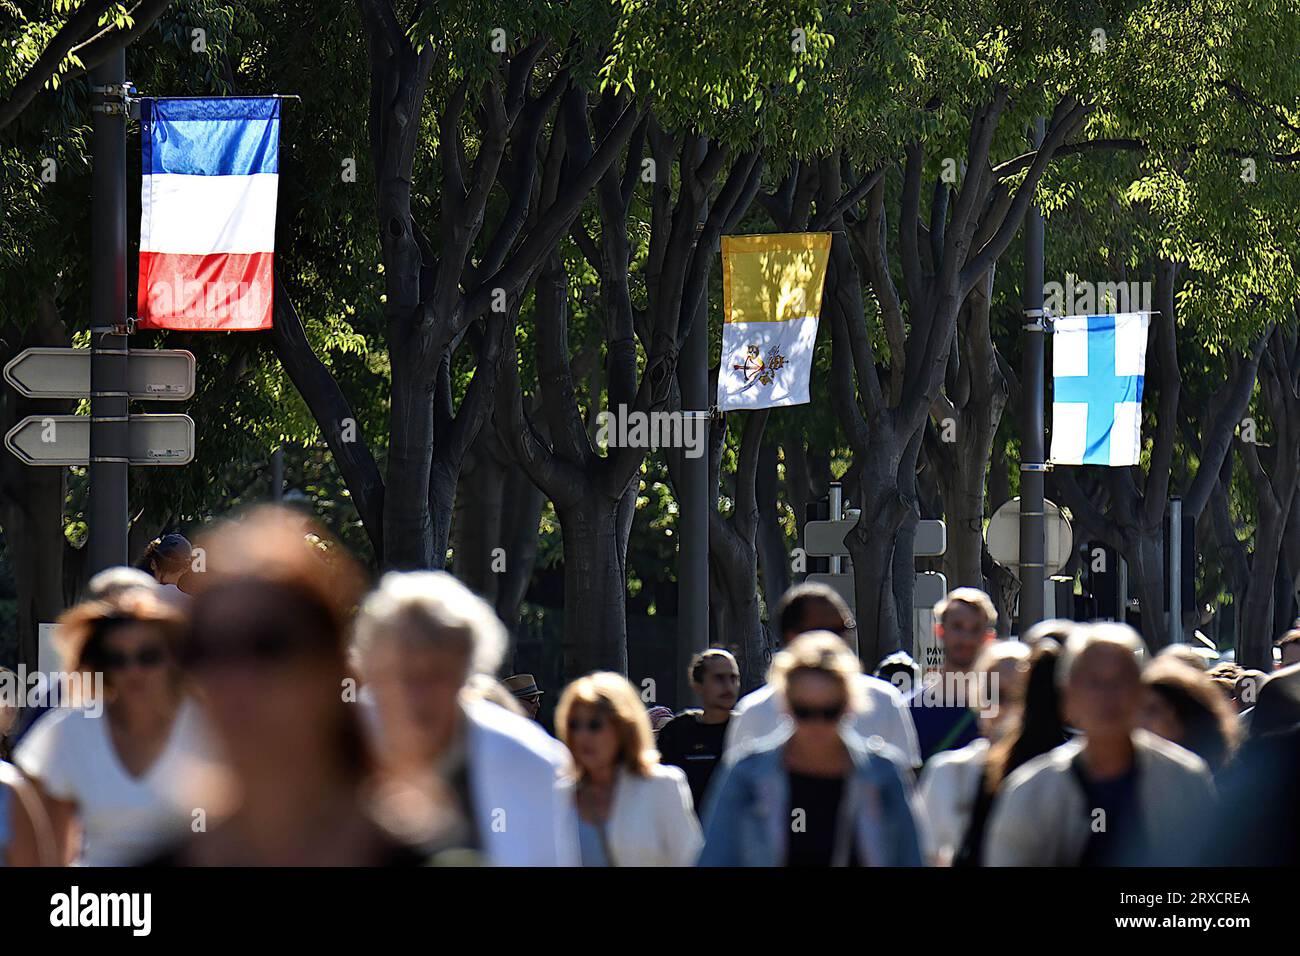 French, Vatican, and Marseille flags hang from street lamps. Thousands of people came to see Pope Francis stroll in his “Papamobile” on Avenue du Prado, they attended the high mass on giant screens at the Vélodrome stadium. Stock Photo